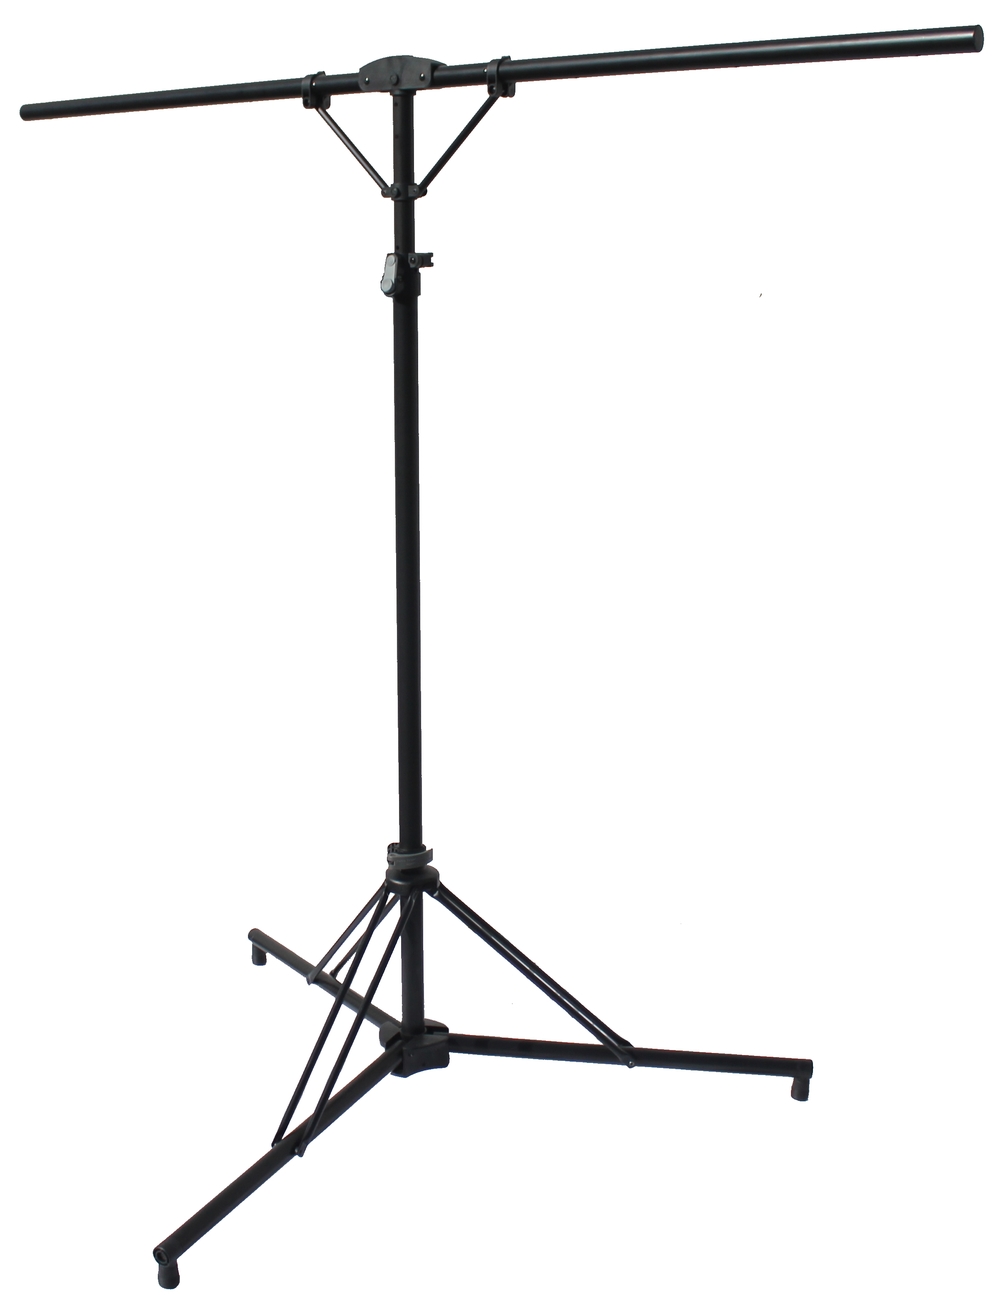 SL-50 Heavy Duty Lighting Stand — Peak Stands-The Best Portable Stands